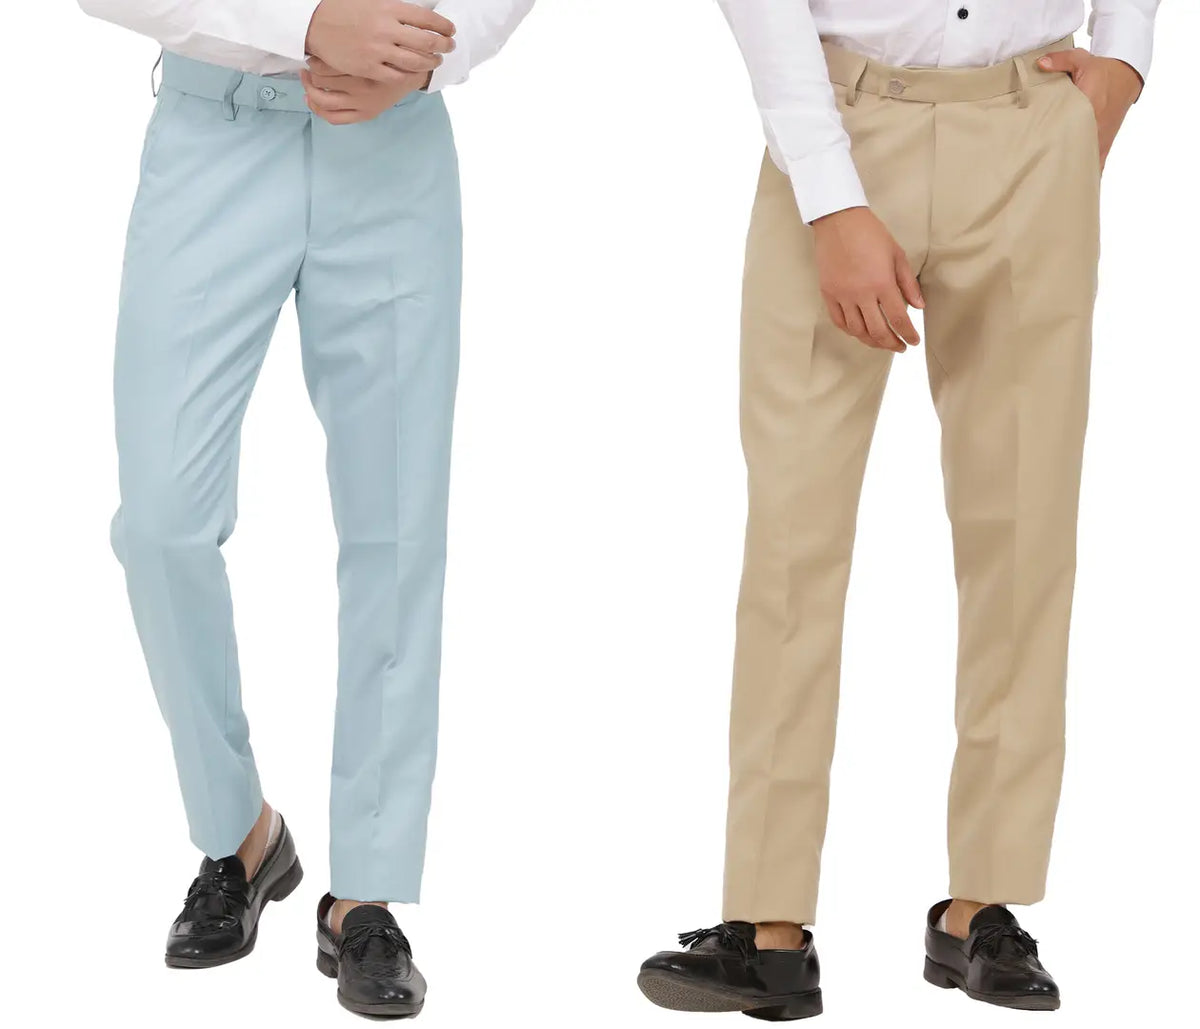 Kundan Men Poly-Viscose Blended Light Sky Blue and Beige Formal Trousers ( Pack of 2 Trousers )